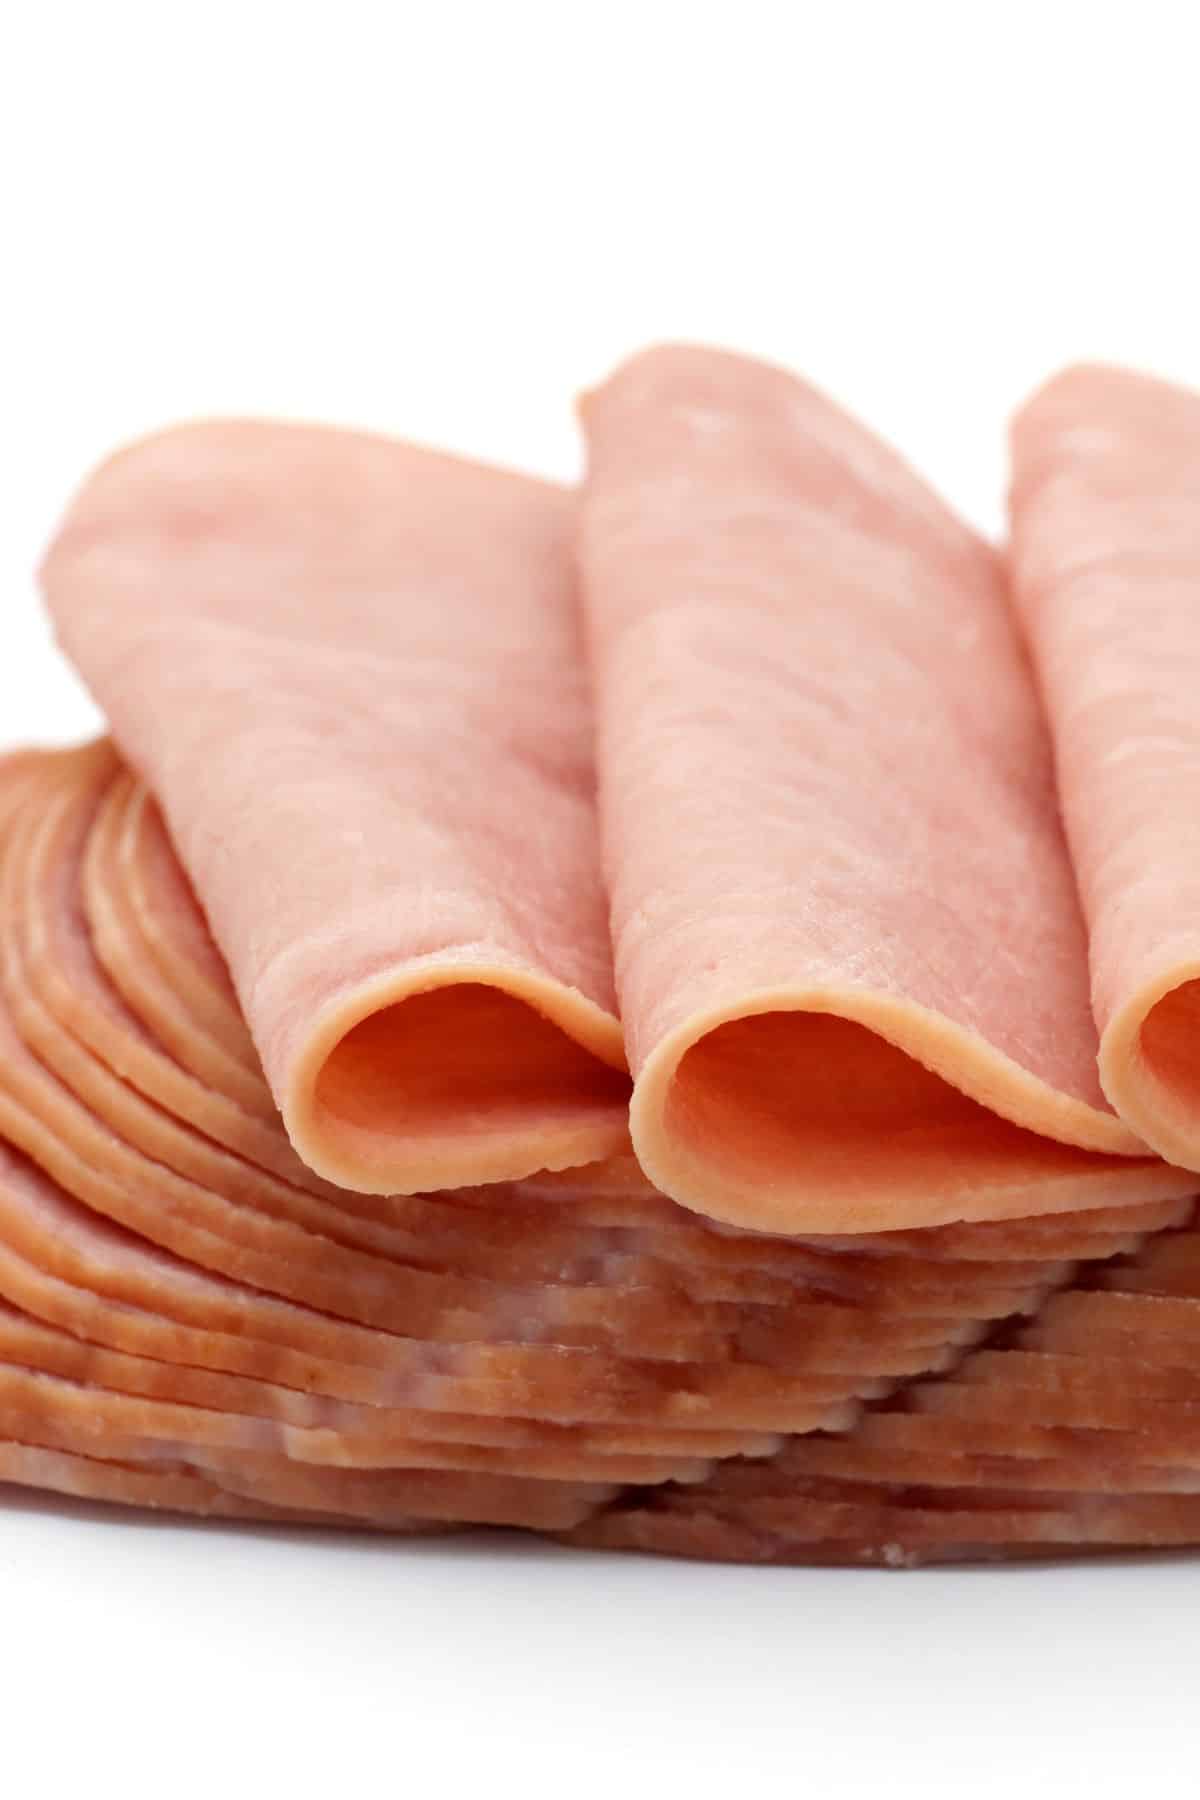 Sliced deli meats in a stack on a white surface.